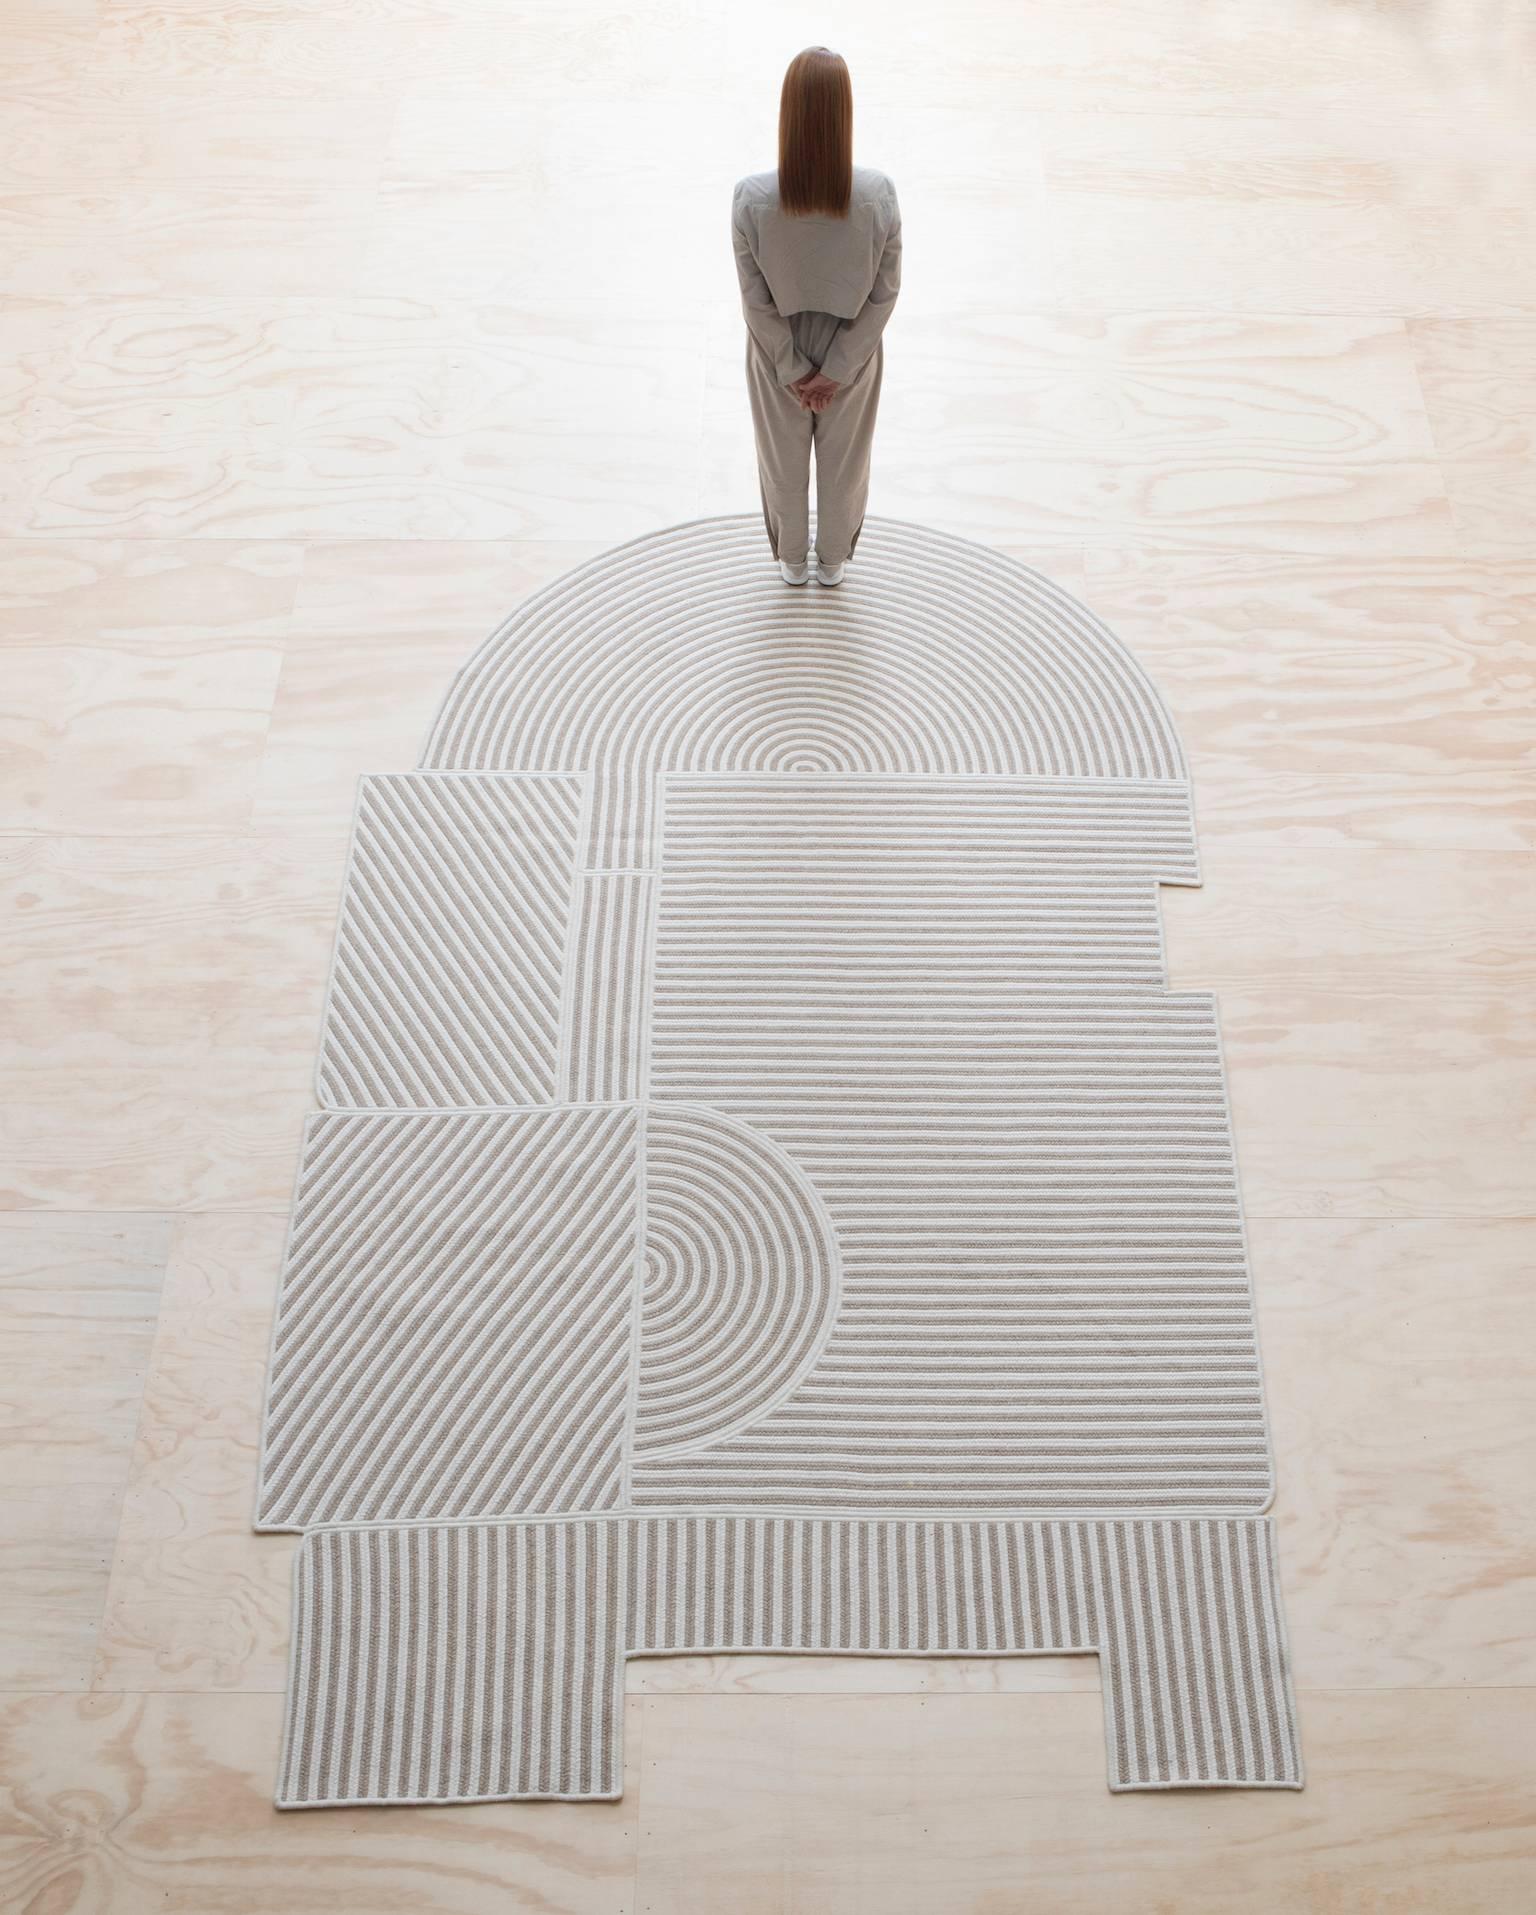 A large braided wool rug made using the same fabrication technique as our Pool rug series, but with a form inspired by aerial landscapes and crop circles.

Handmade in New England by a mill with 30 years of manufacturing experience, each rug is